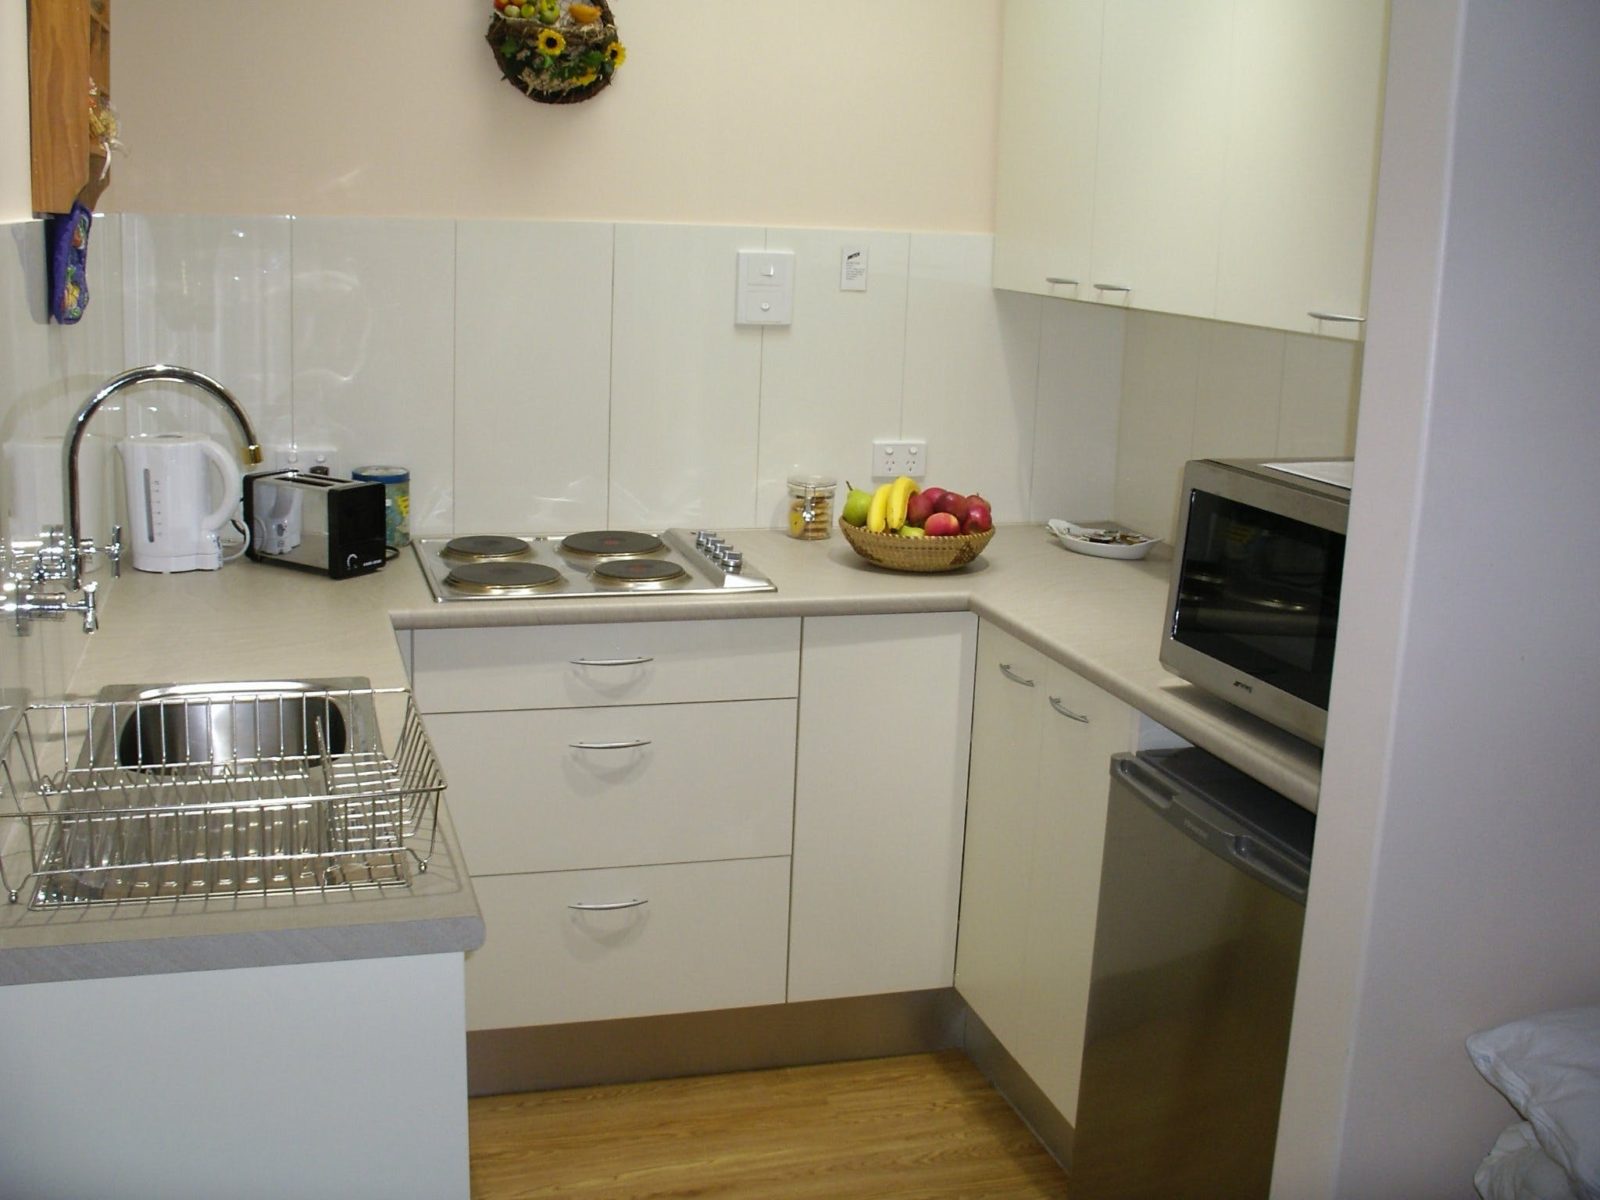 Fully function kitchen